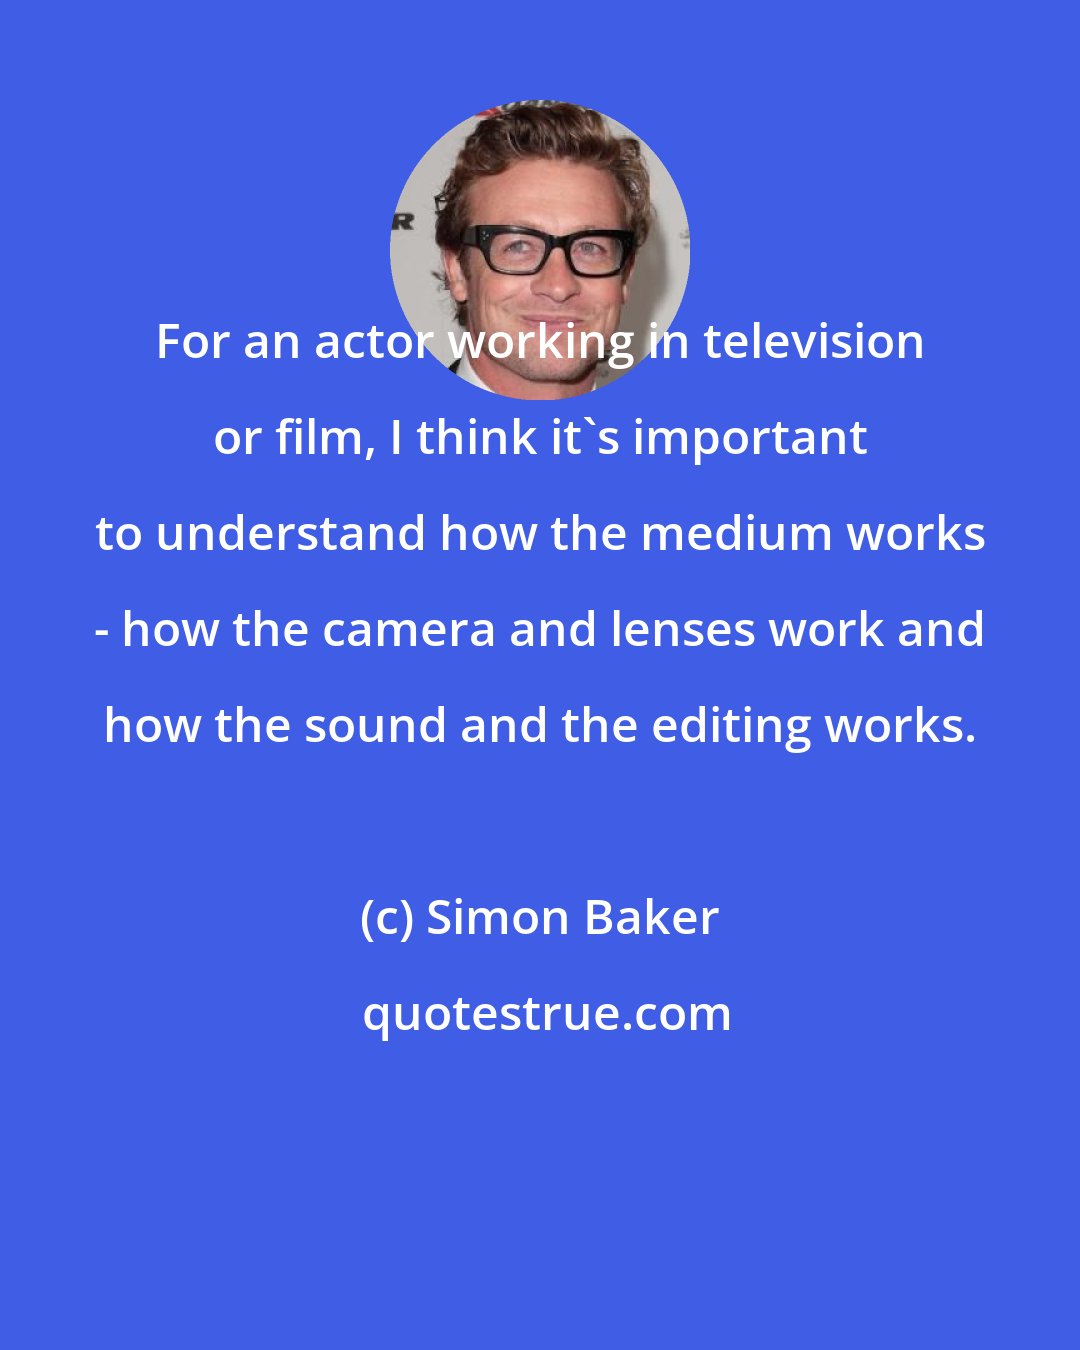 Simon Baker: For an actor working in television or film, I think it's important to understand how the medium works - how the camera and lenses work and how the sound and the editing works.